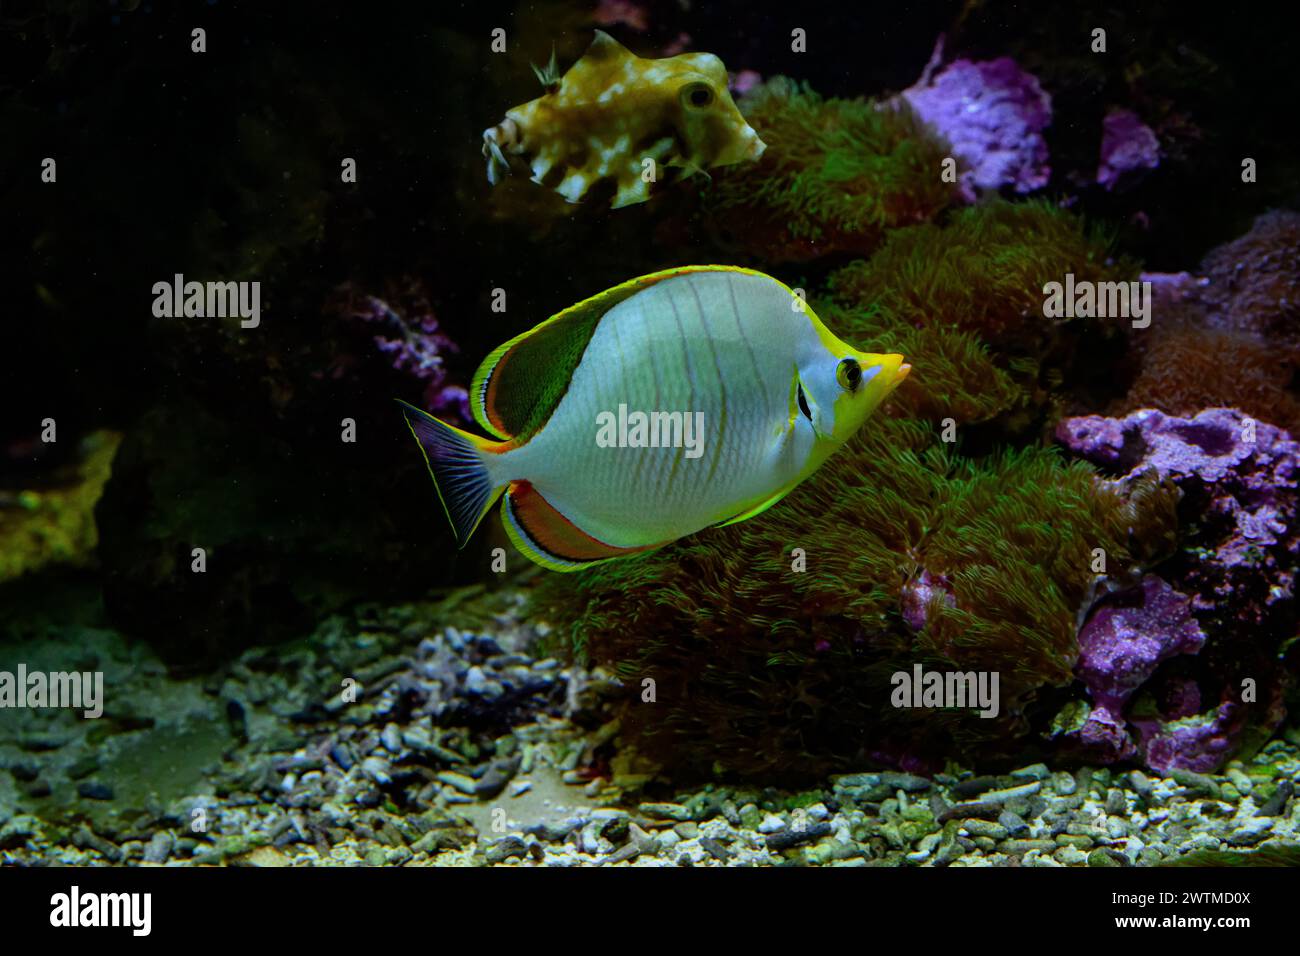 Chaetodon xanthocephalus, known commonly as the Yellowhead butterflyfish, is a species of marine fish in the family Chaetodontidae. Stock Photo